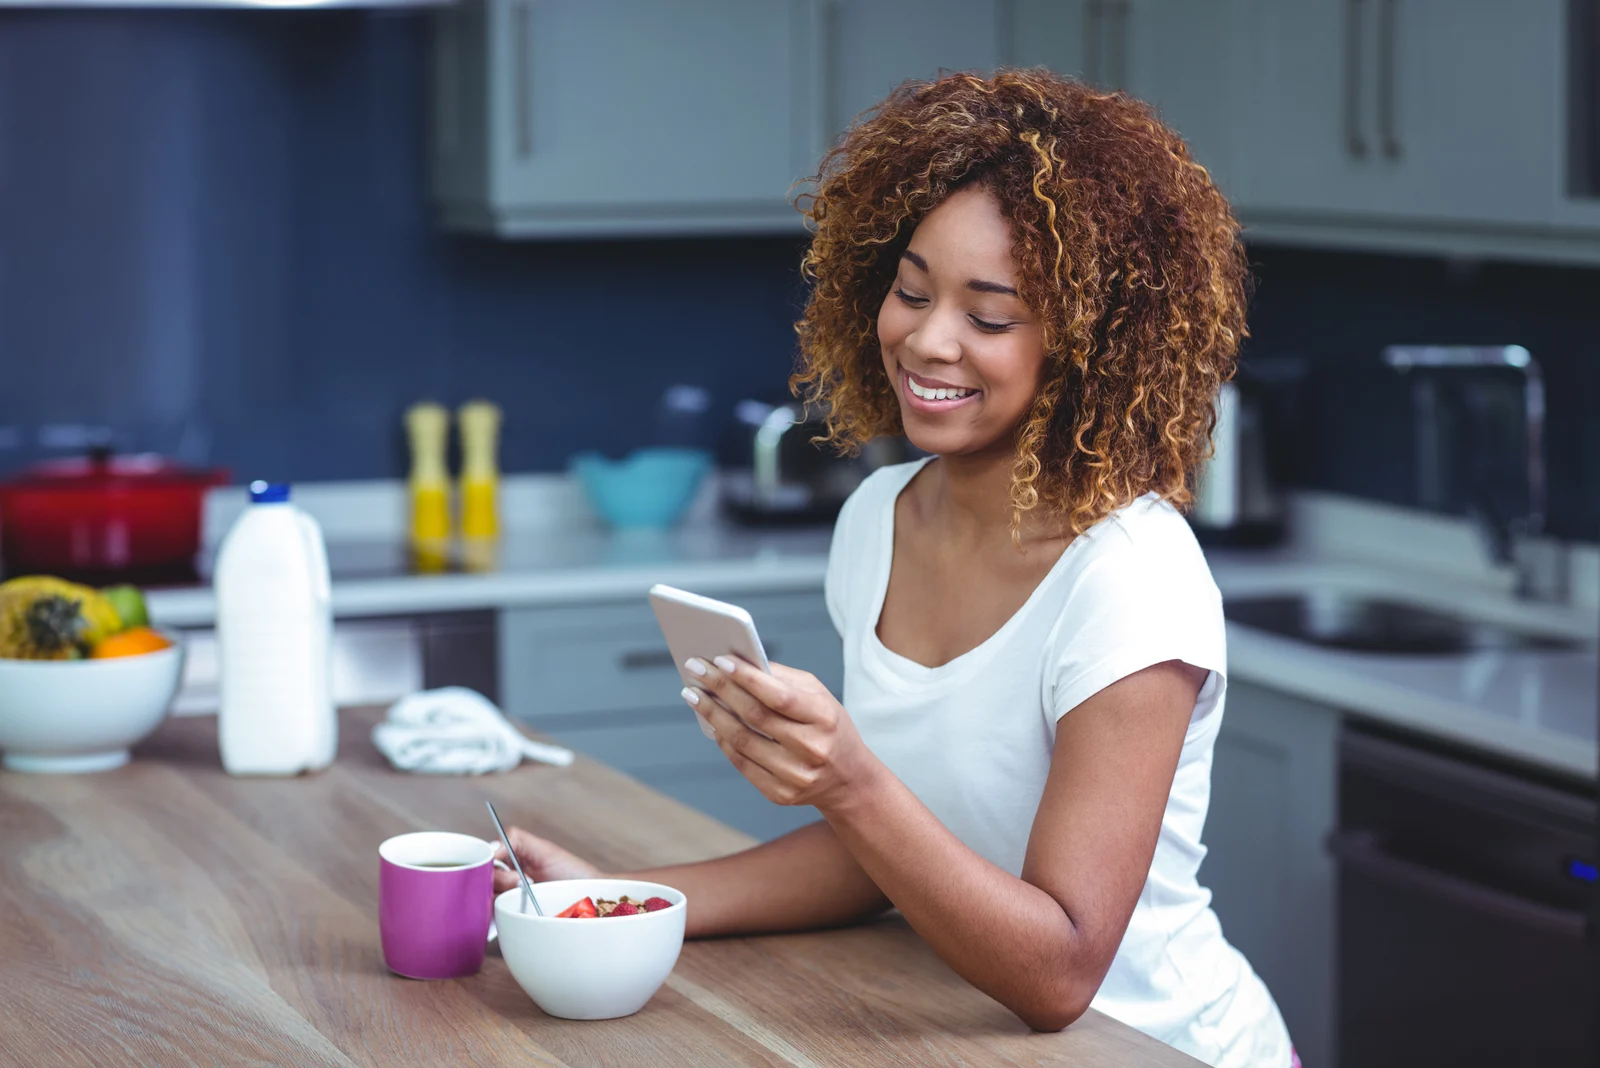 smiling woman sitting in the kitchen and pressing the phone